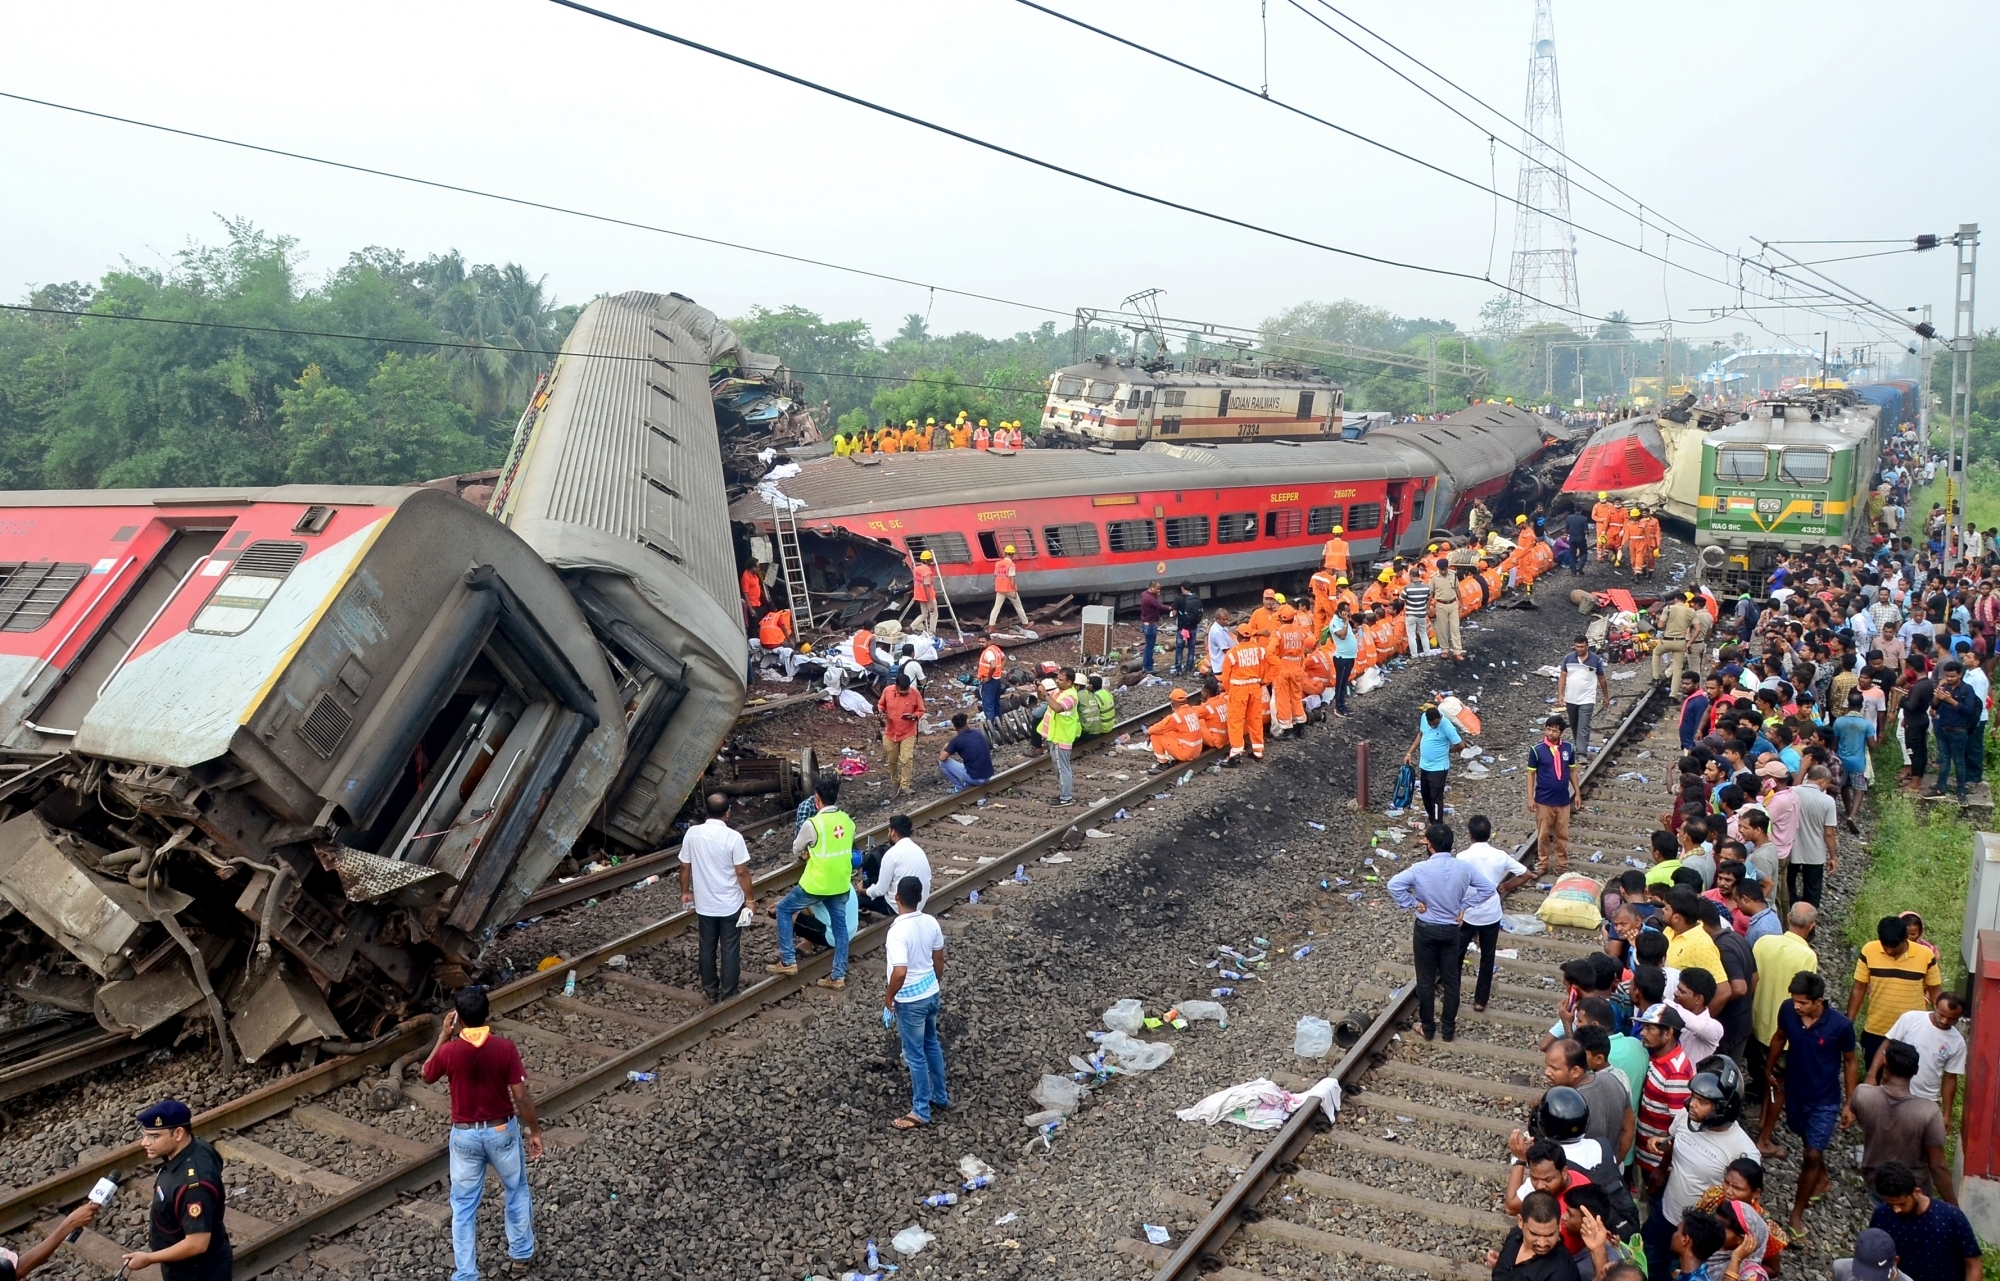  Odisha Tragedy: Special Train Carrying Stranded Passengers To Reach Chennai On S-TeluguStop.com